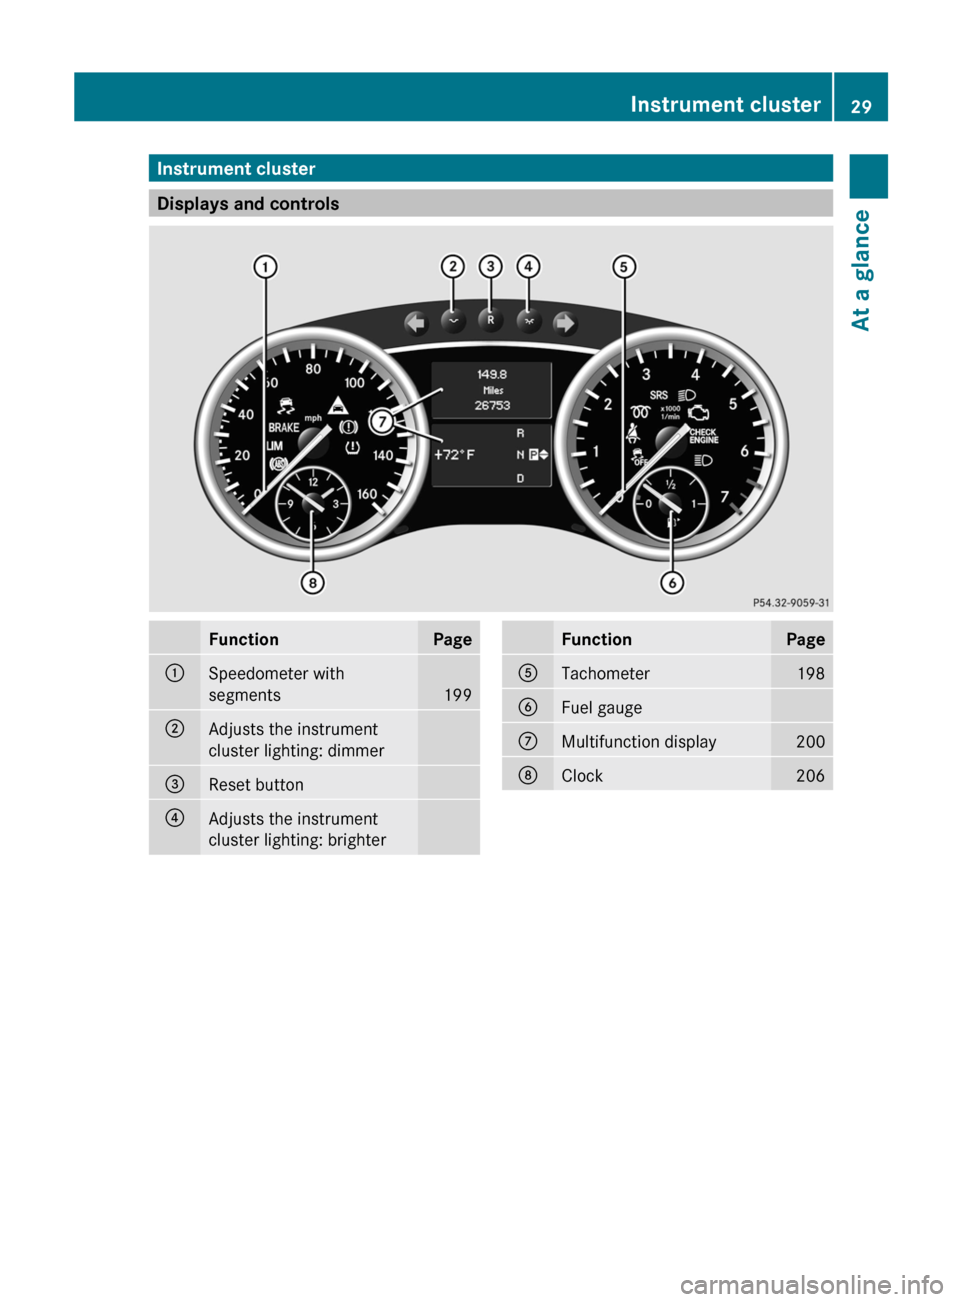 MERCEDES-BENZ R-Class 2012 W251 Owners Guide Instrument cluster
Displays and controls
FunctionPage:Speedometer with
segments
199
;Adjusts the instrument
cluster lighting: dimmer=Reset button?Adjusts the instrument
cluster lighting: brighterFunct